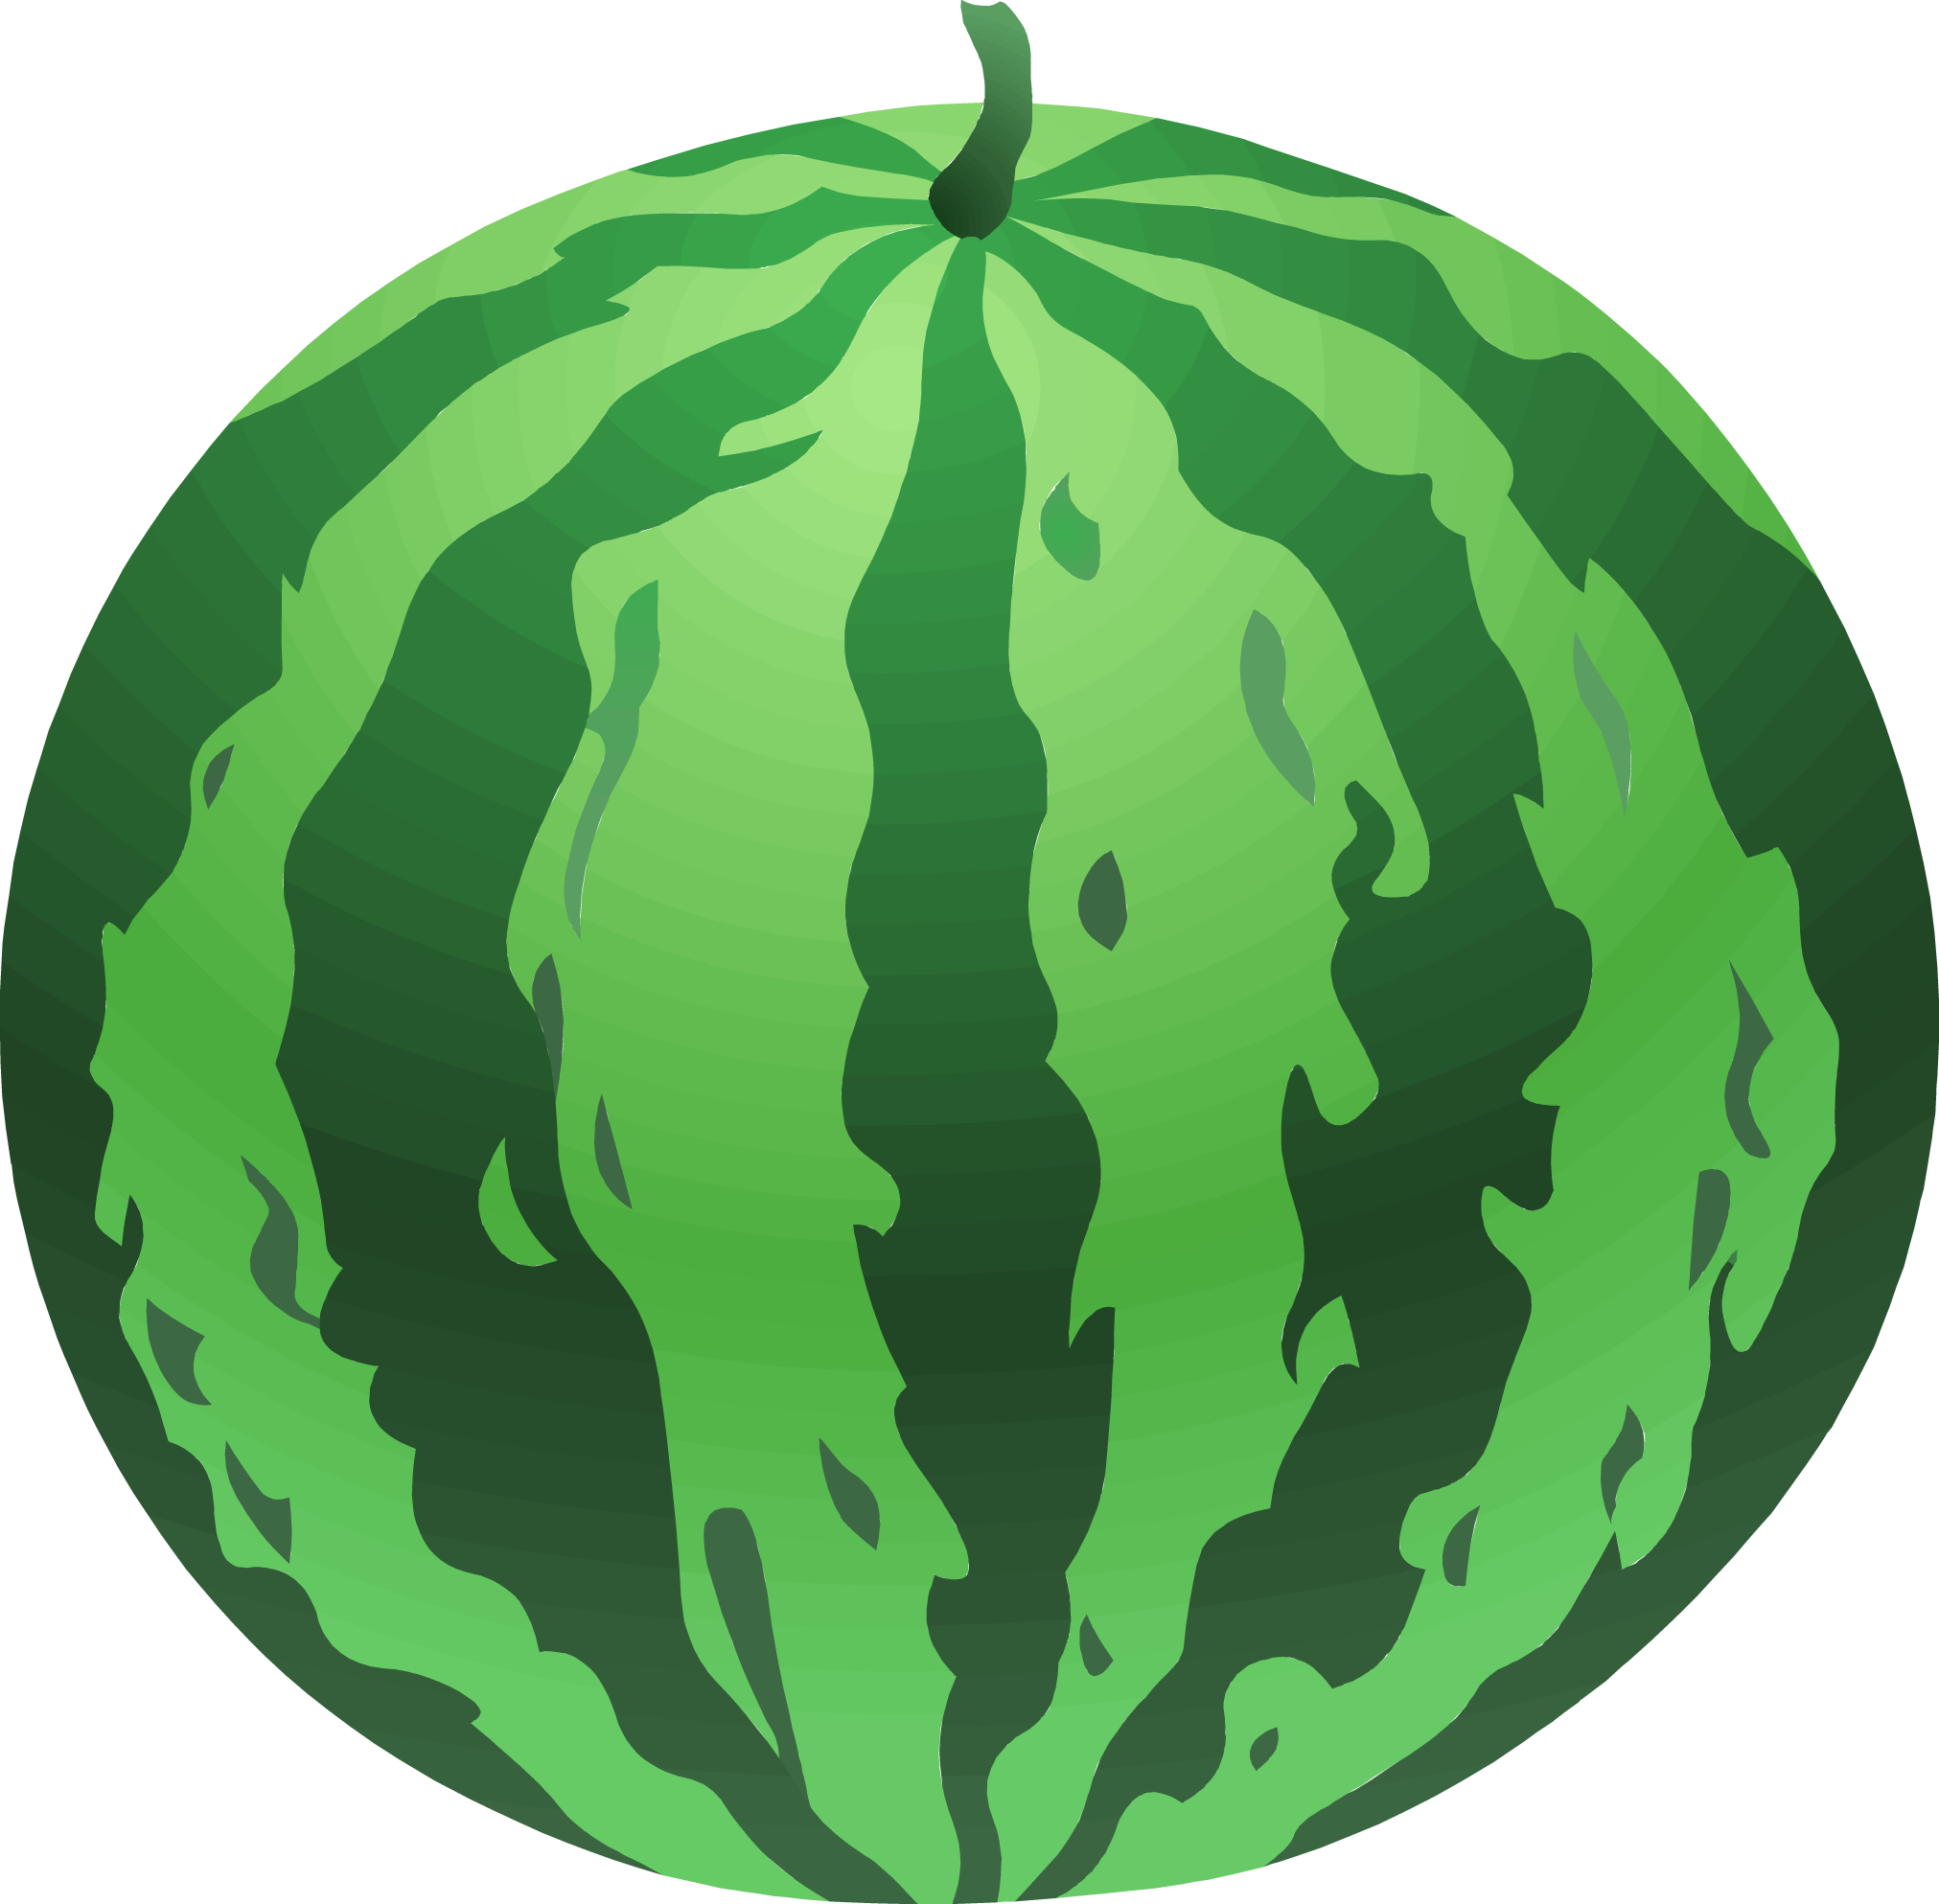 Download Wallpaper Image Category Watermelons